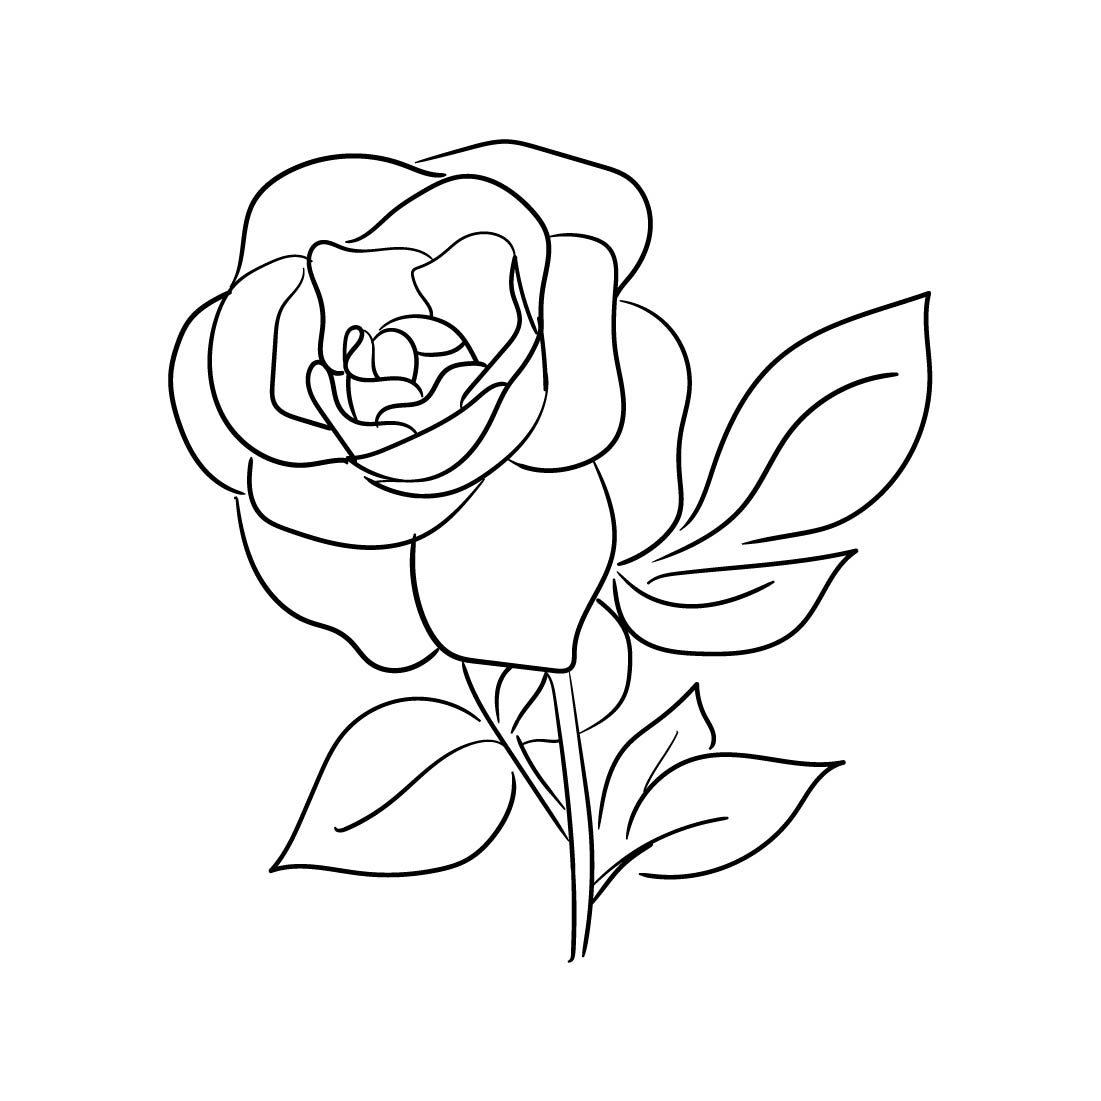 Hand Drawn Roses Vector Illustration cover image.